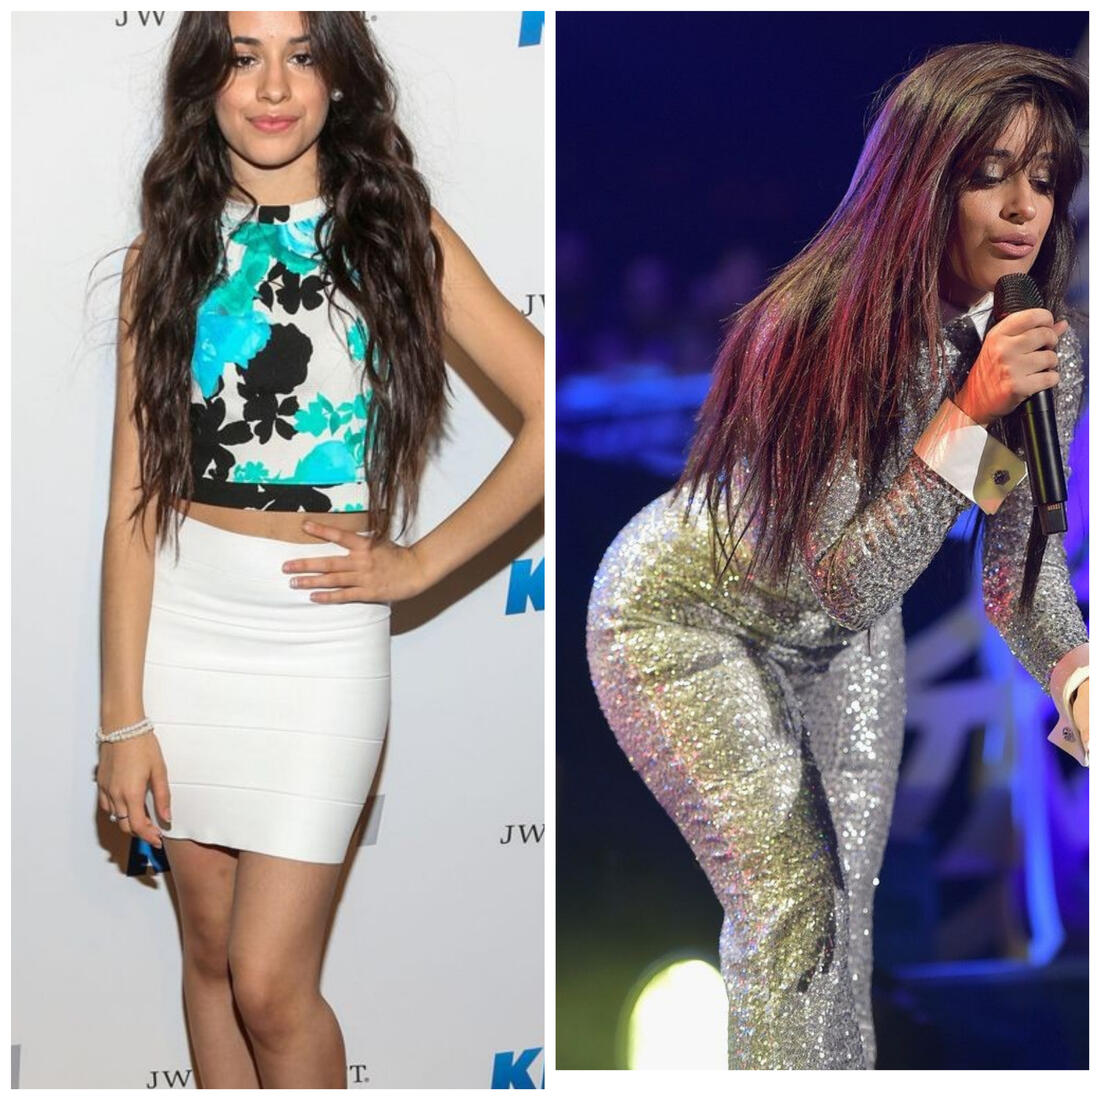 All posts from Your Friendly Forum Lurker in Camila Cabello Curvage